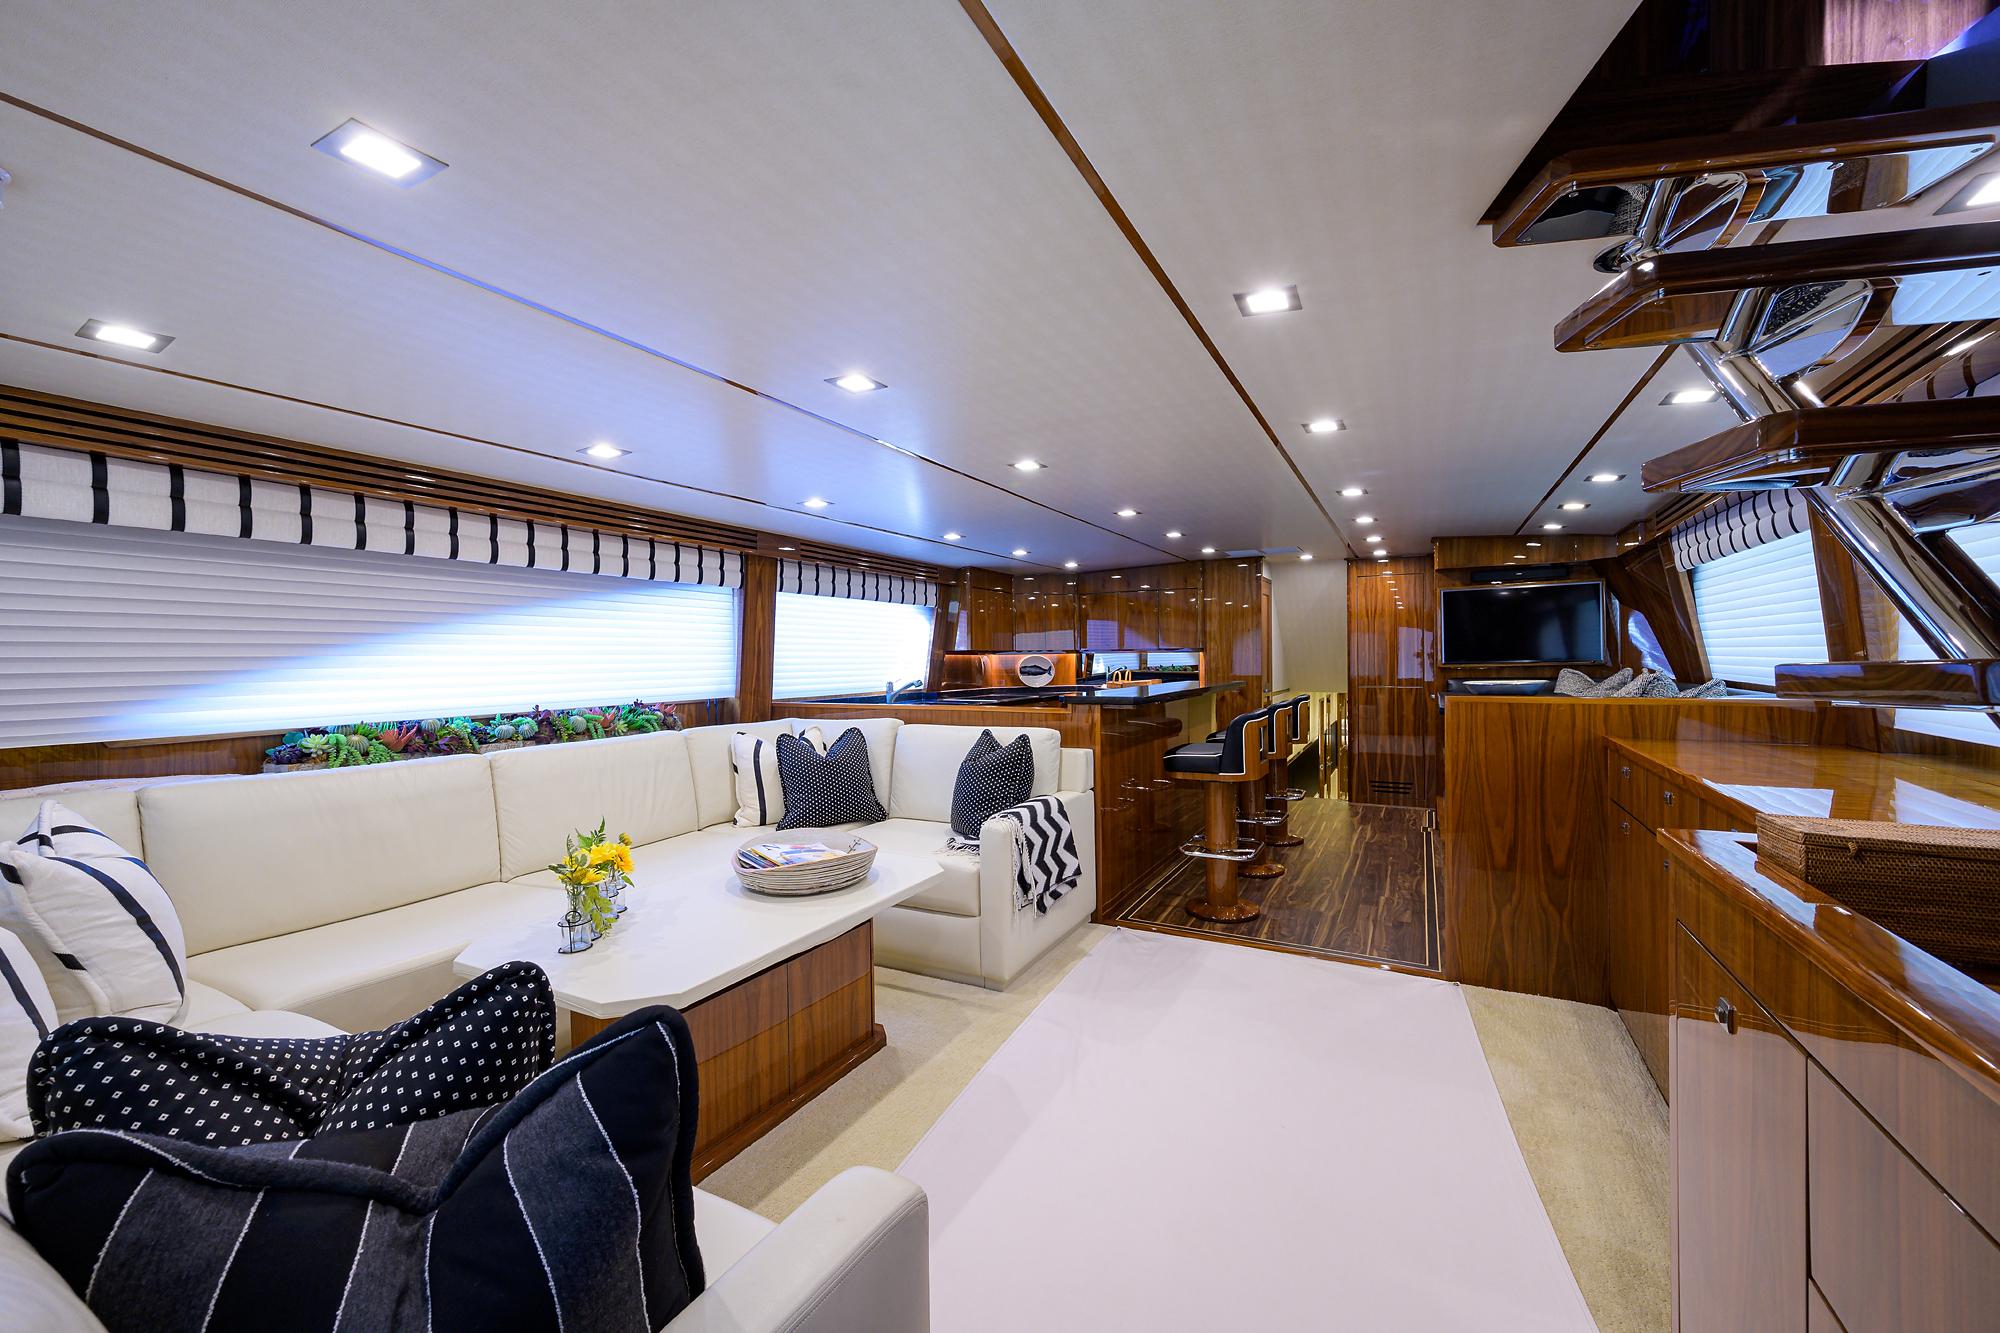 2017 Viking 80 - Salon & Galley View From Entrance